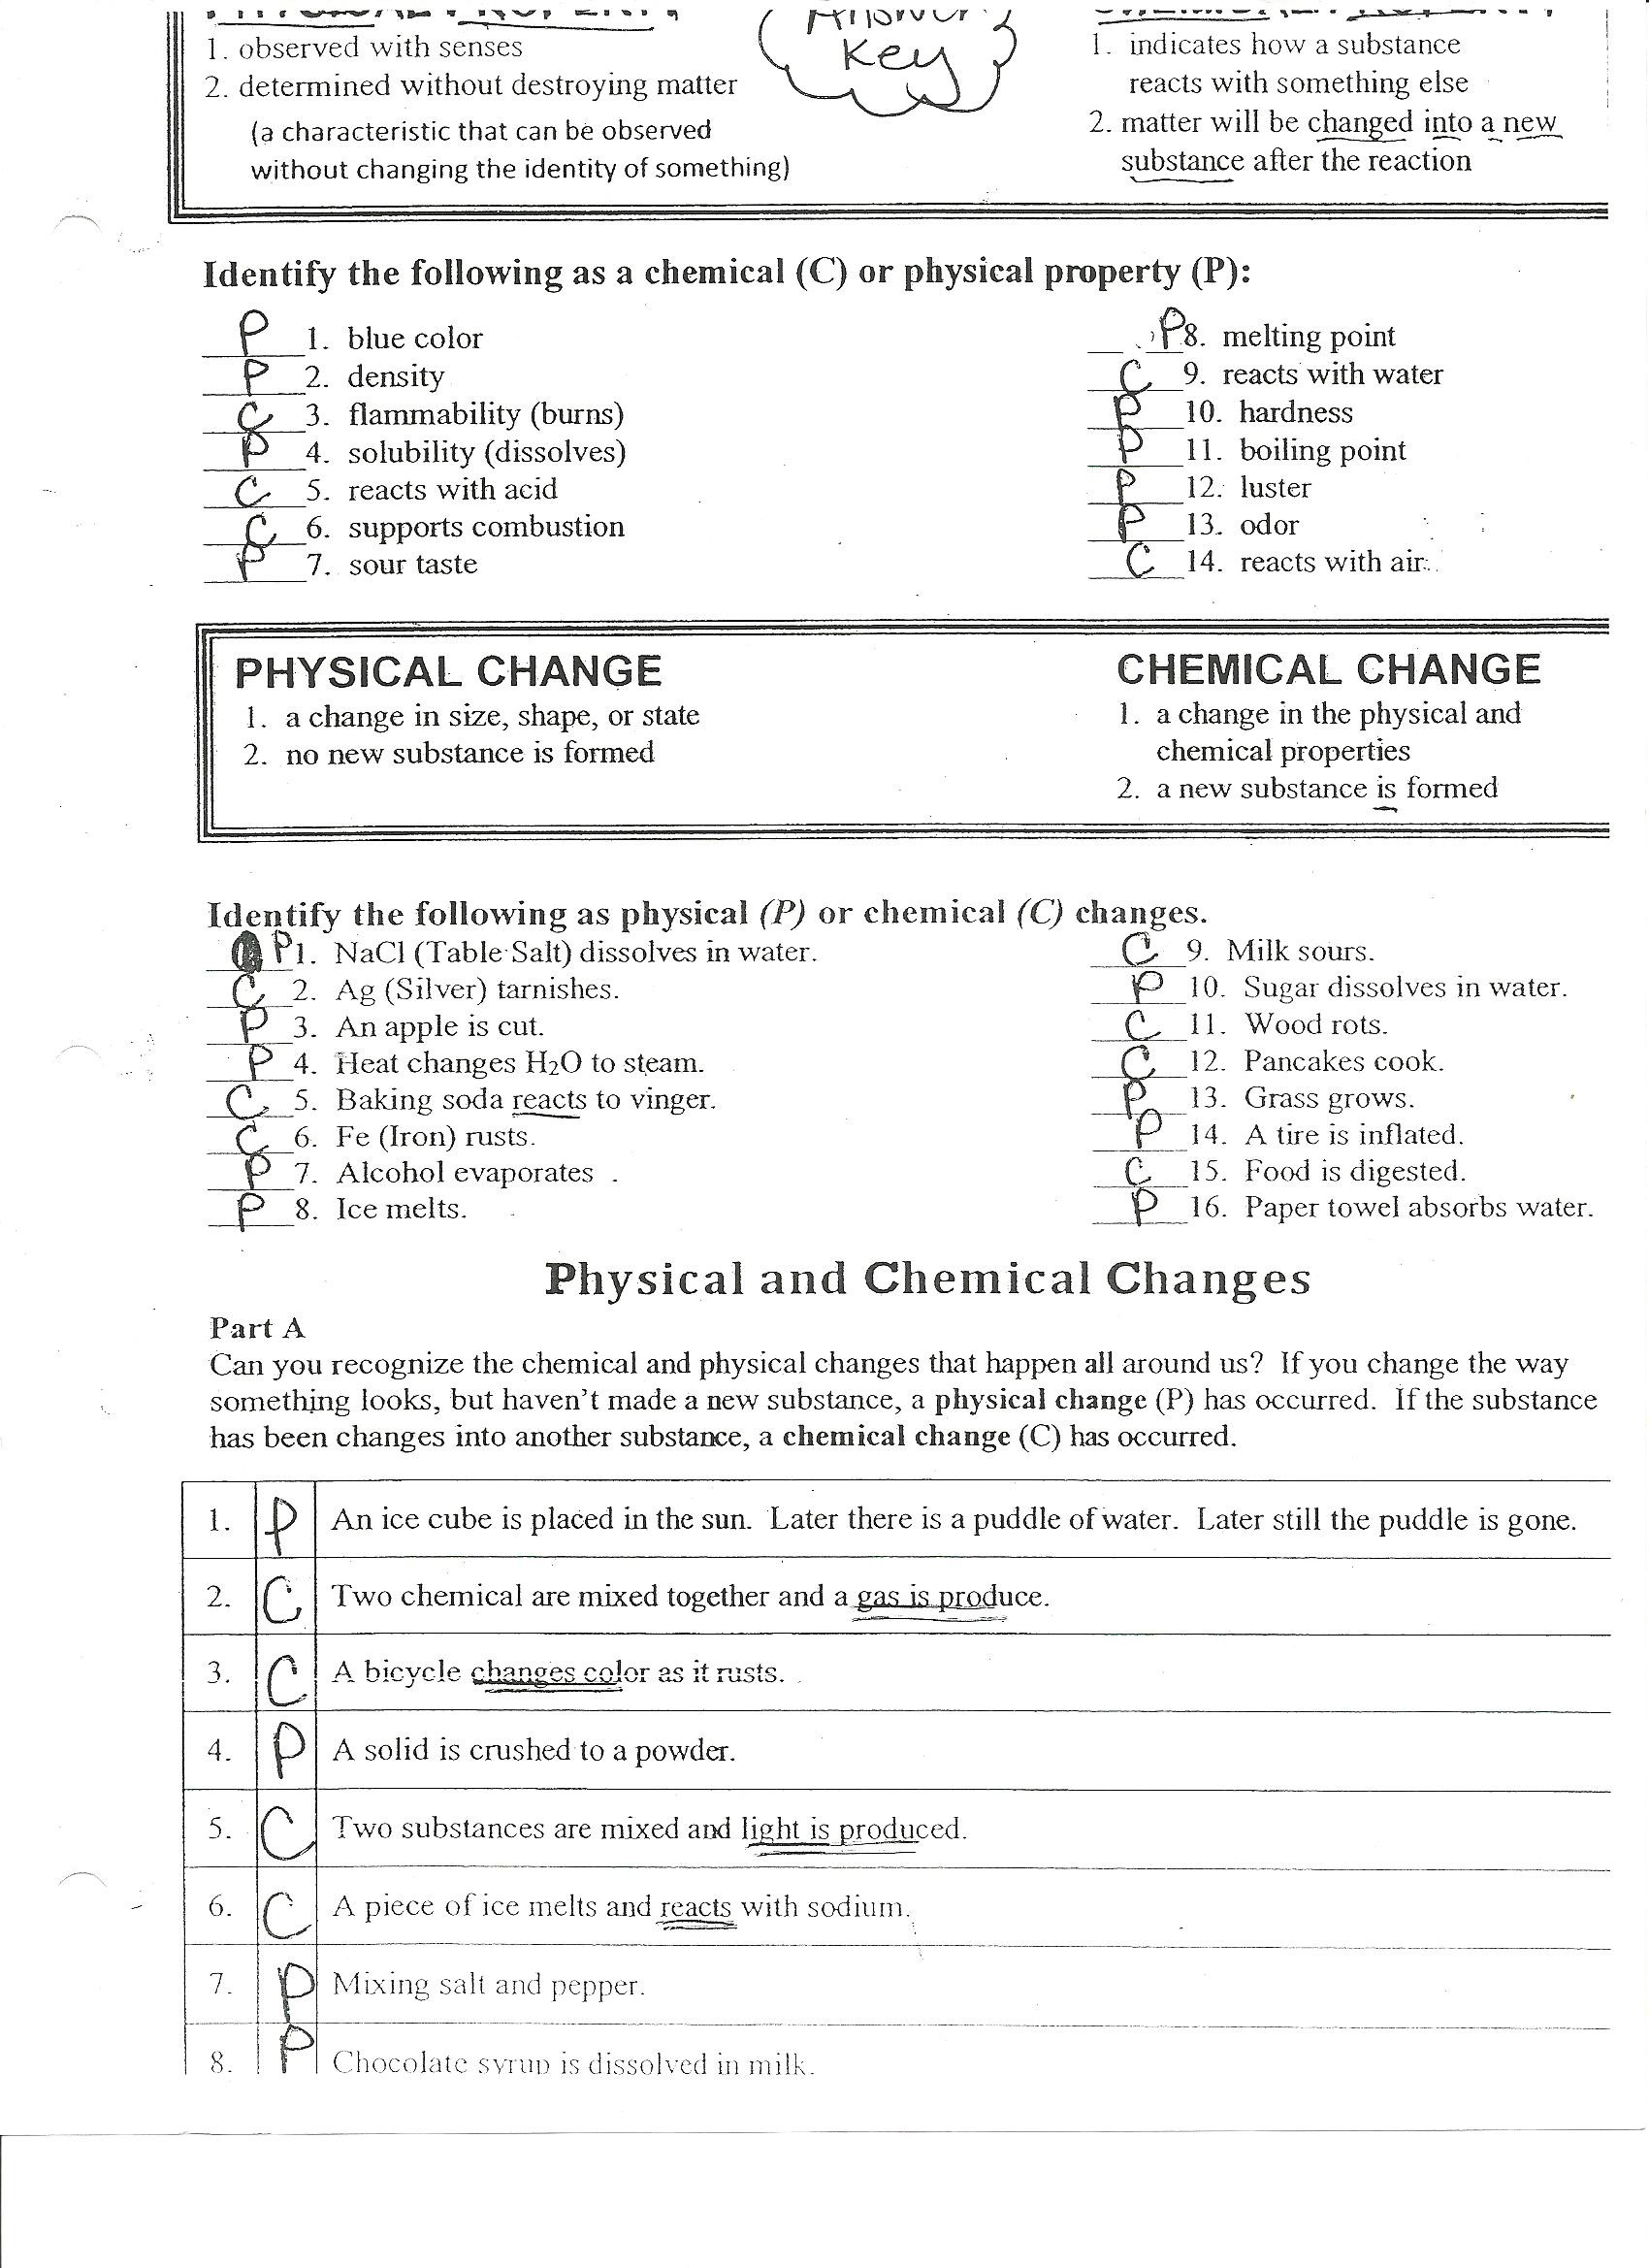 Physical and Chemical Properties Worksheet Chemical and Physical Properties Worksheet Answers